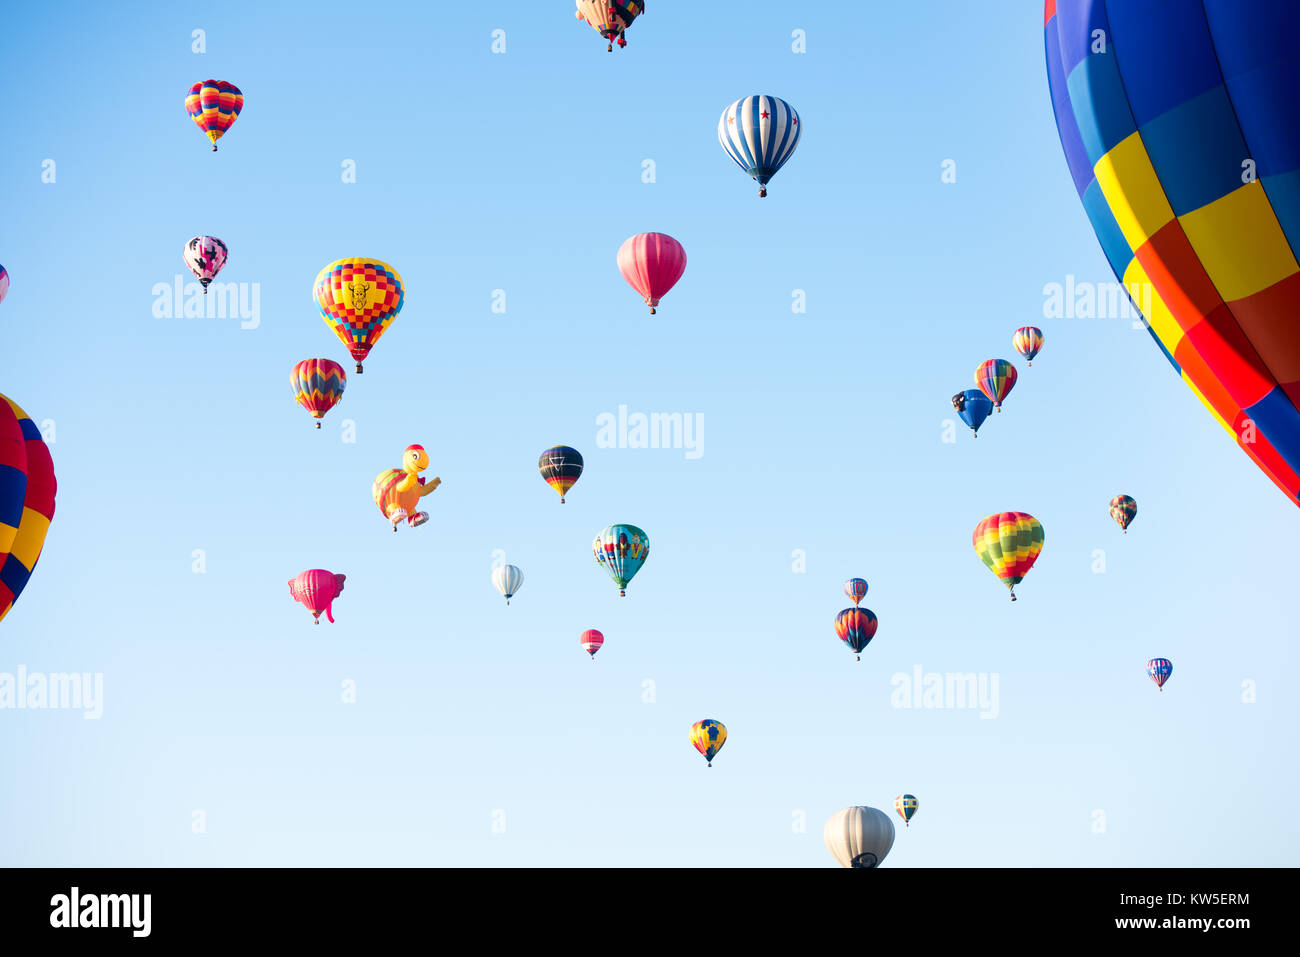 Colorful Hot Air Balloons Taking of at Festival Stock Photo